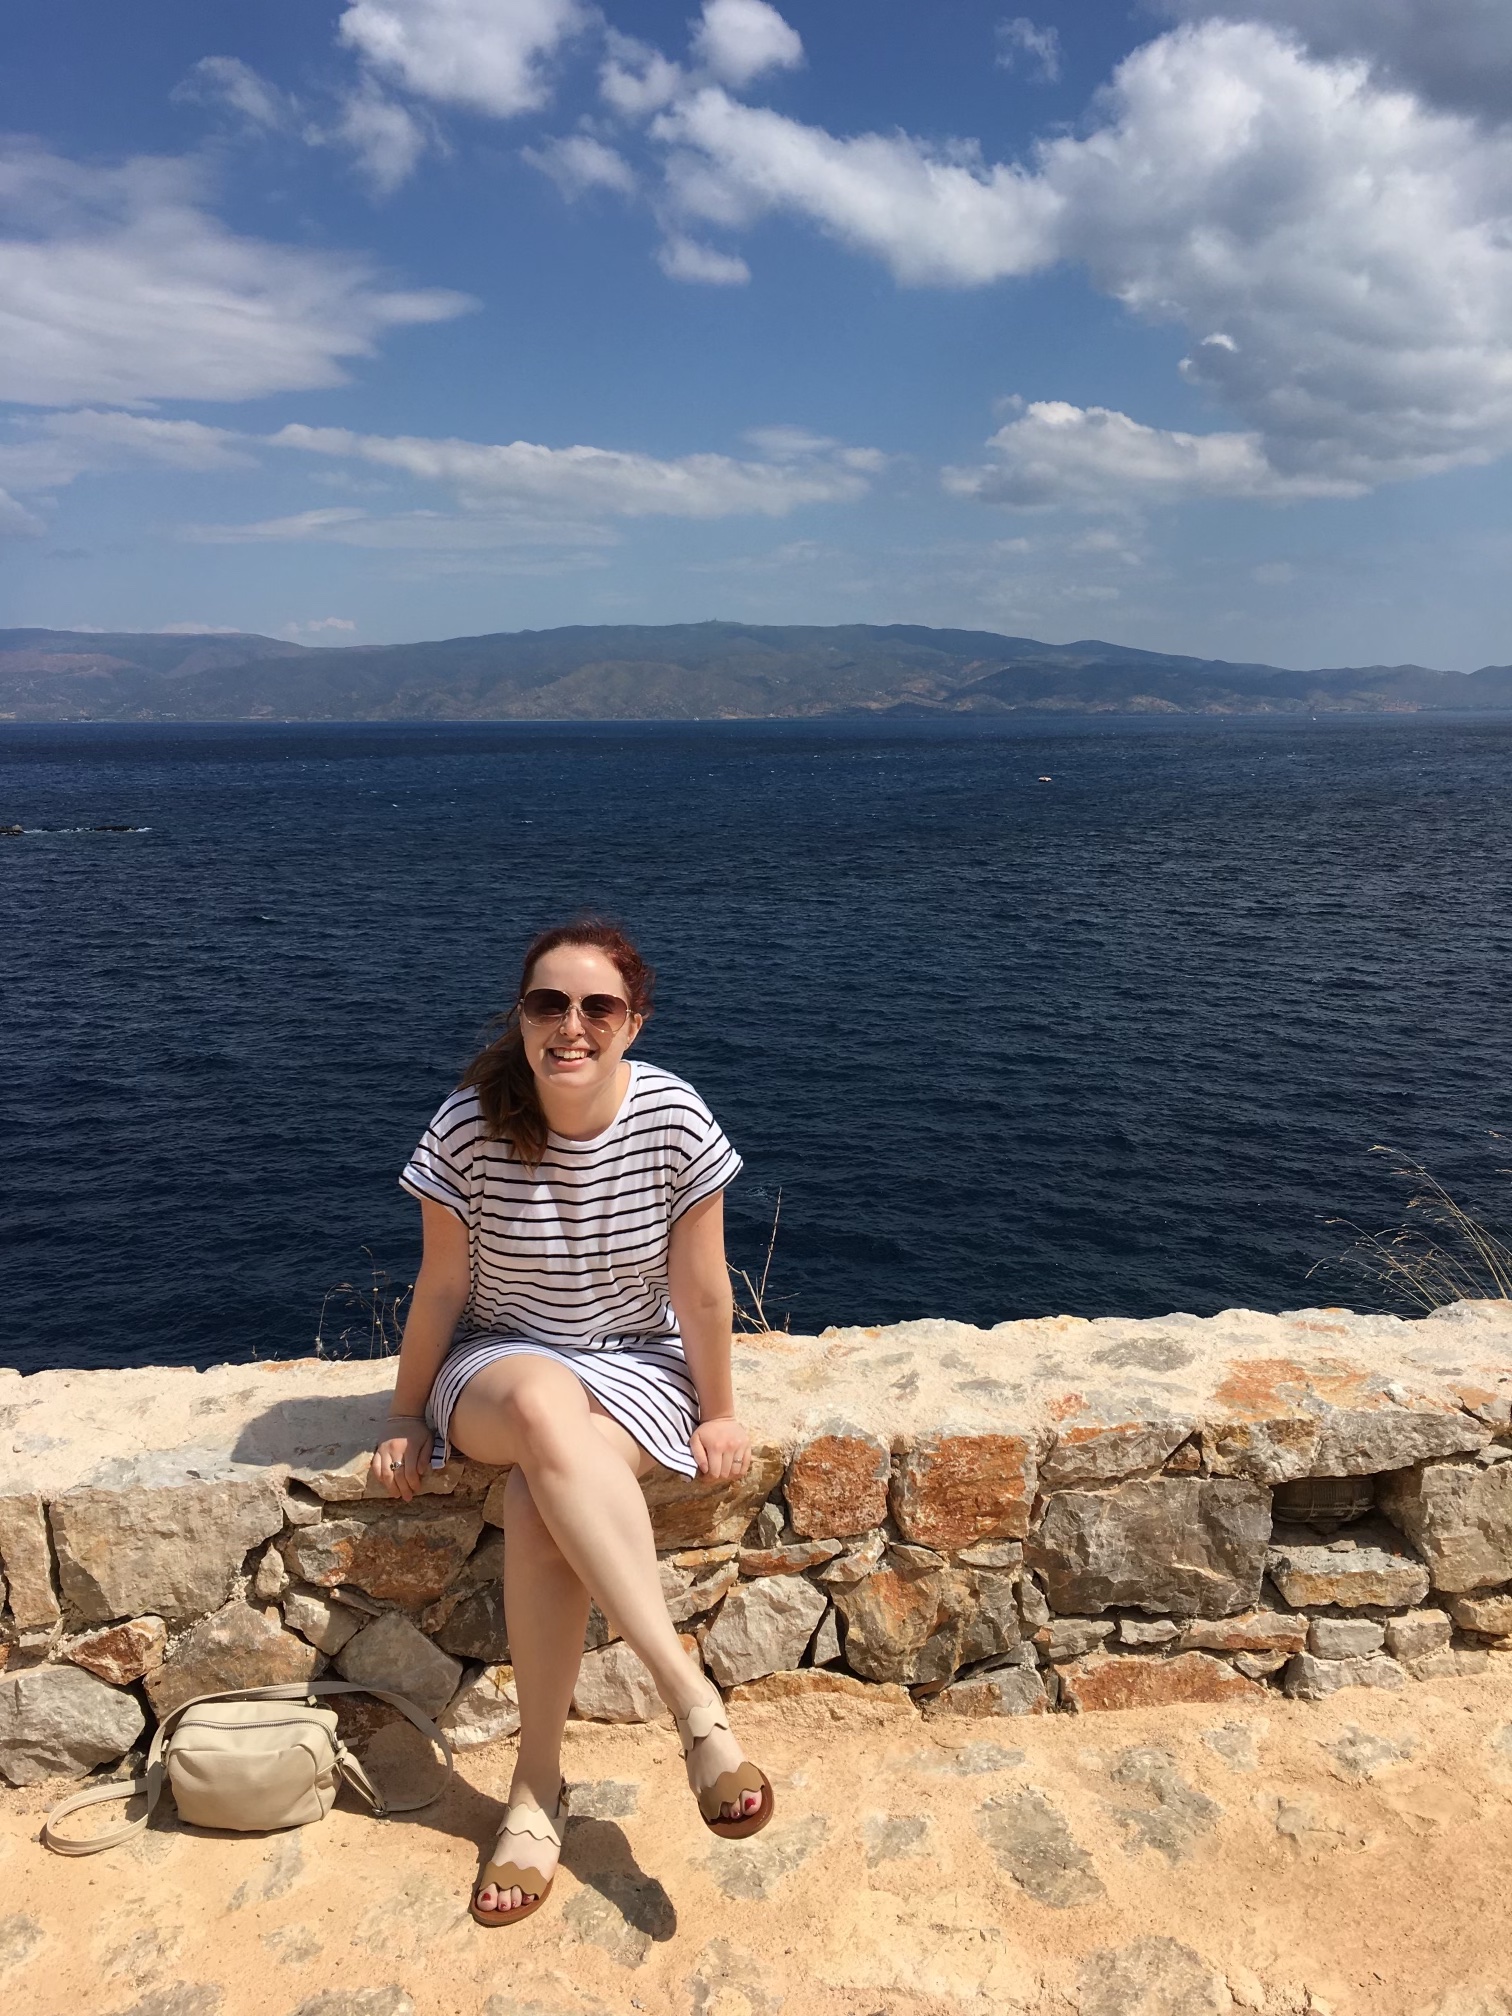 Patient Advocate Emily Byrn sits on a limestone ledge, smiling at the camera with the ocean in the background.